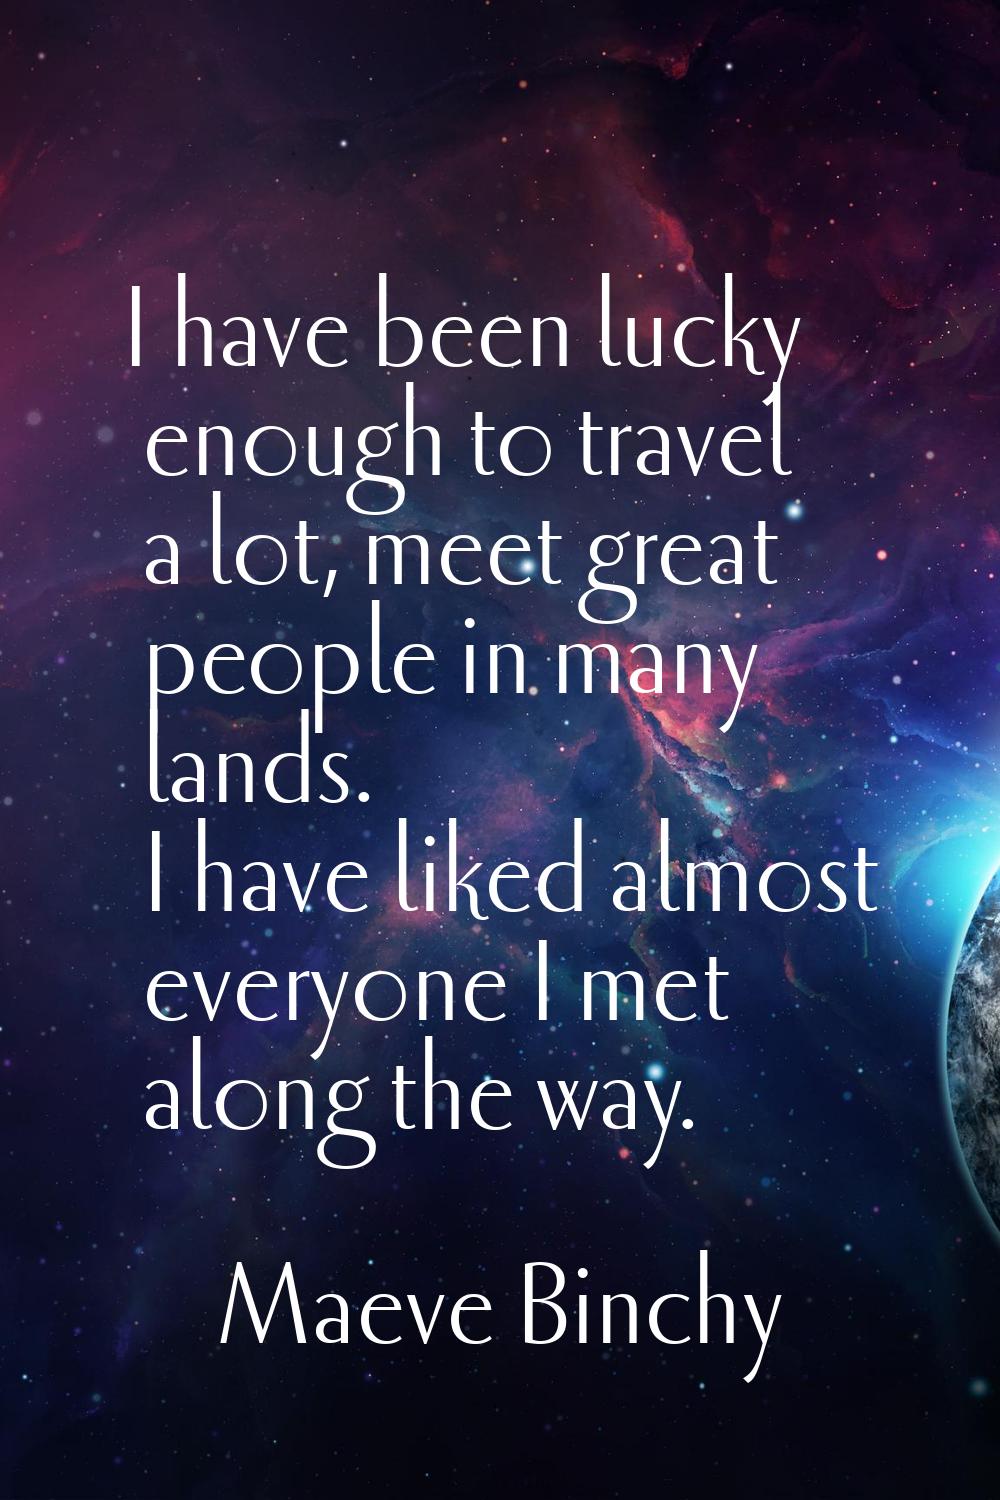 I have been lucky enough to travel a lot, meet great people in many lands. I have liked almost ever